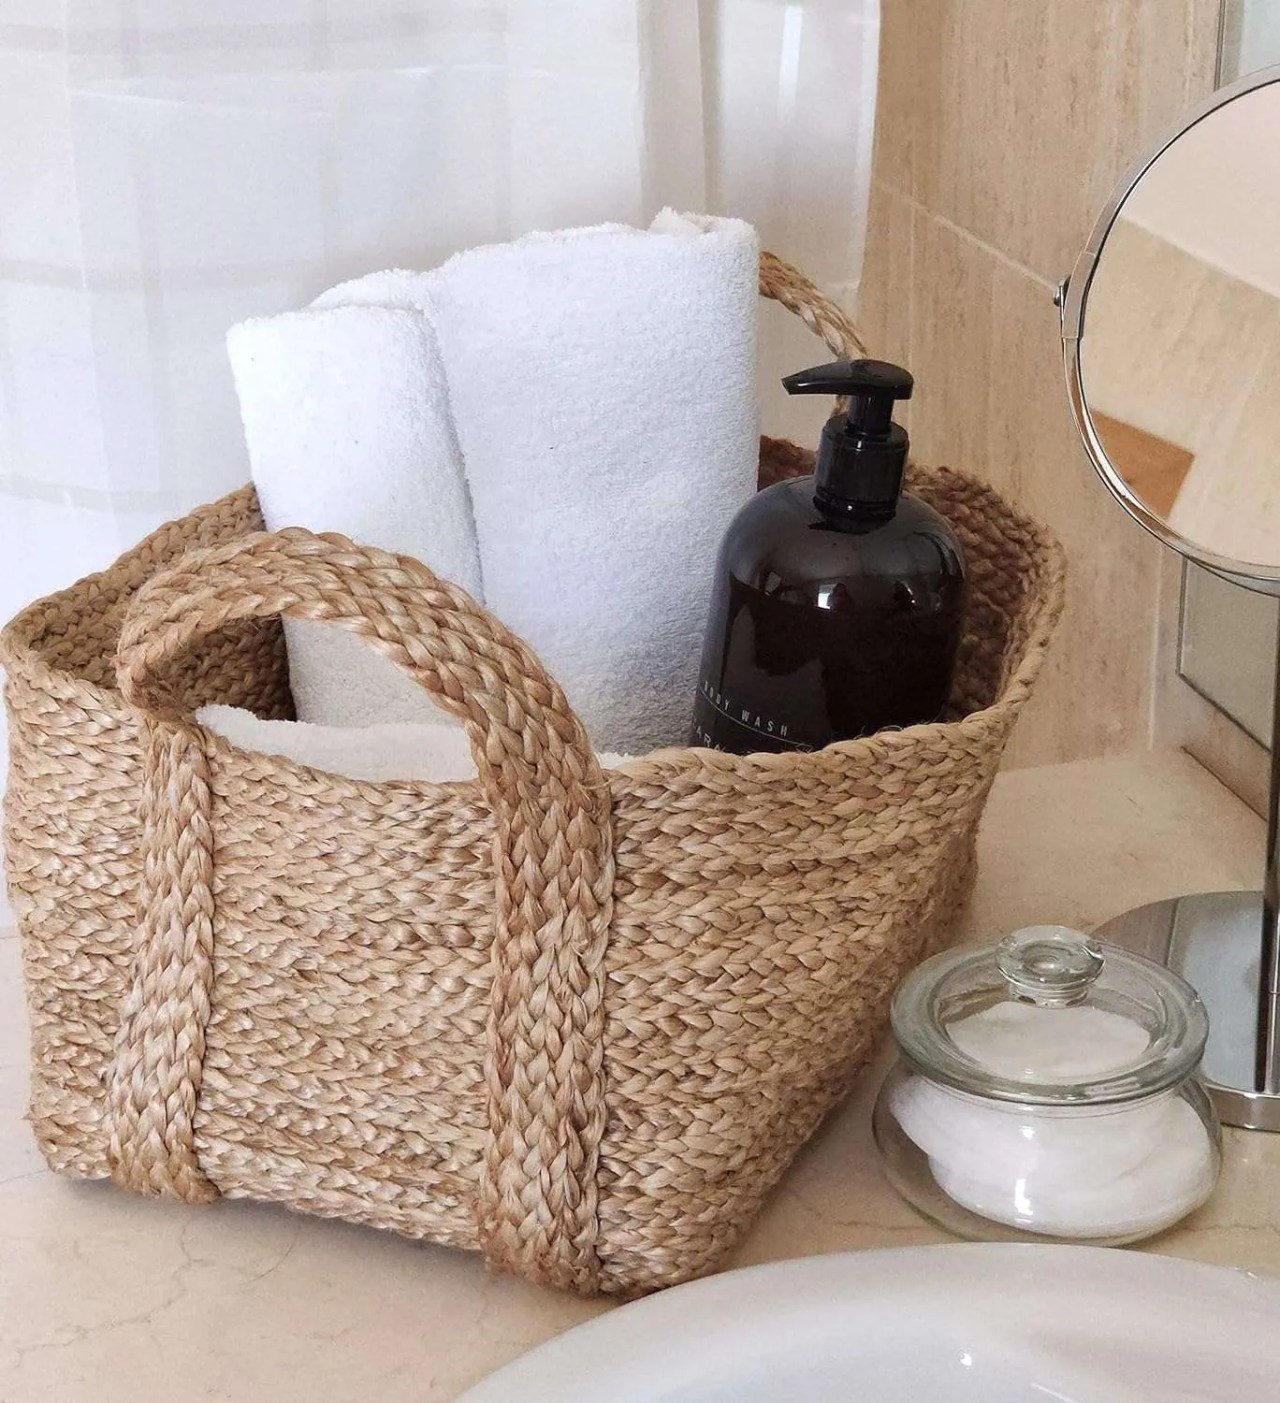 woven baskets with bathroom items inside